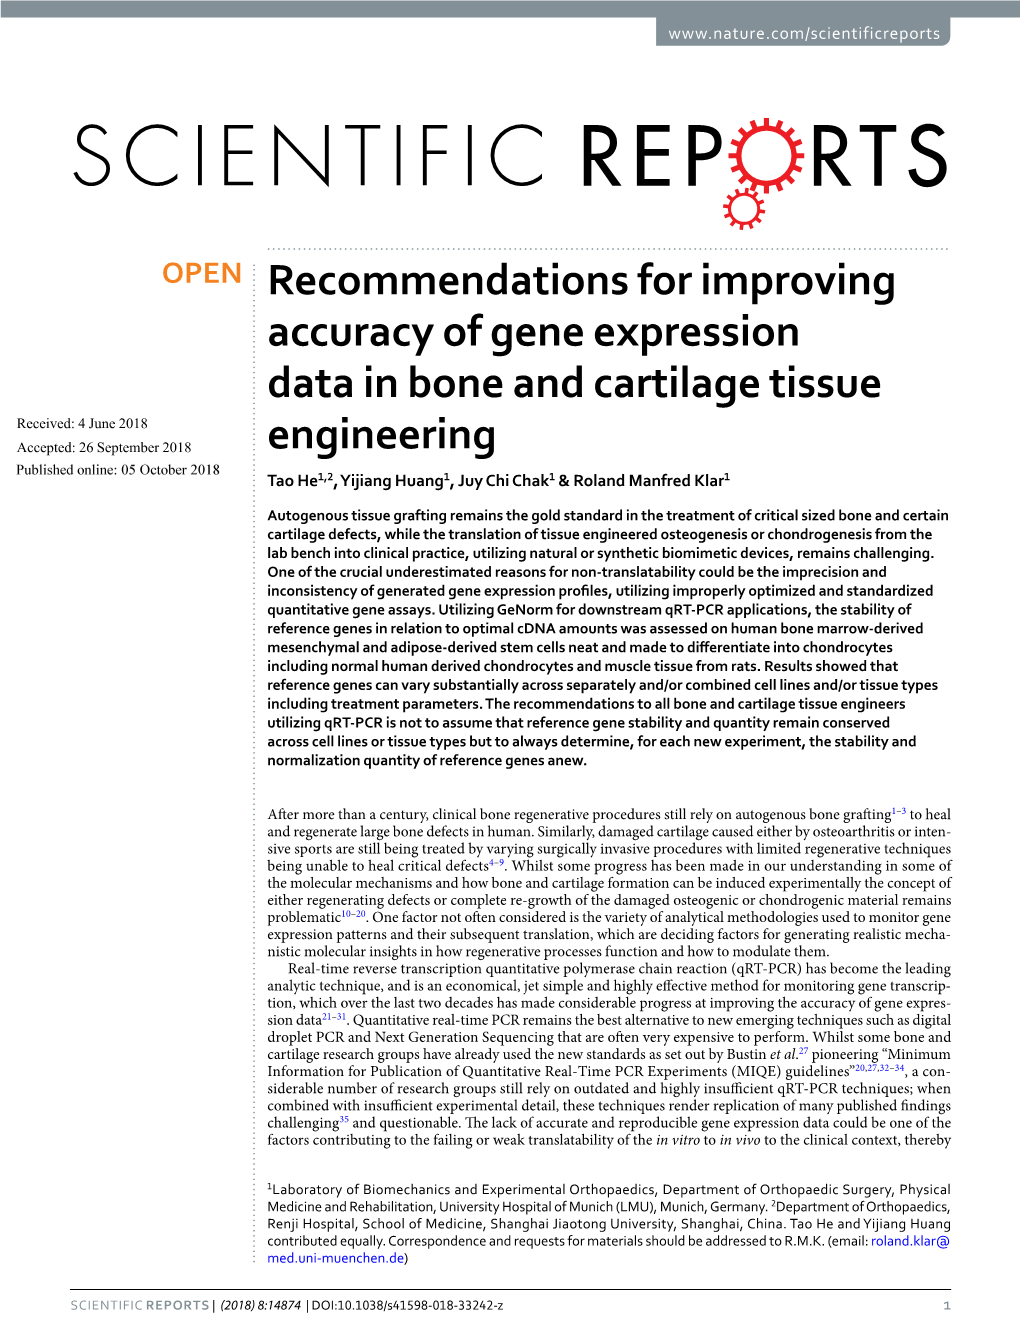 Recommendations for Improving Accuracy of Gene Expression Data in Bone and Cartilage Tissue Engineering